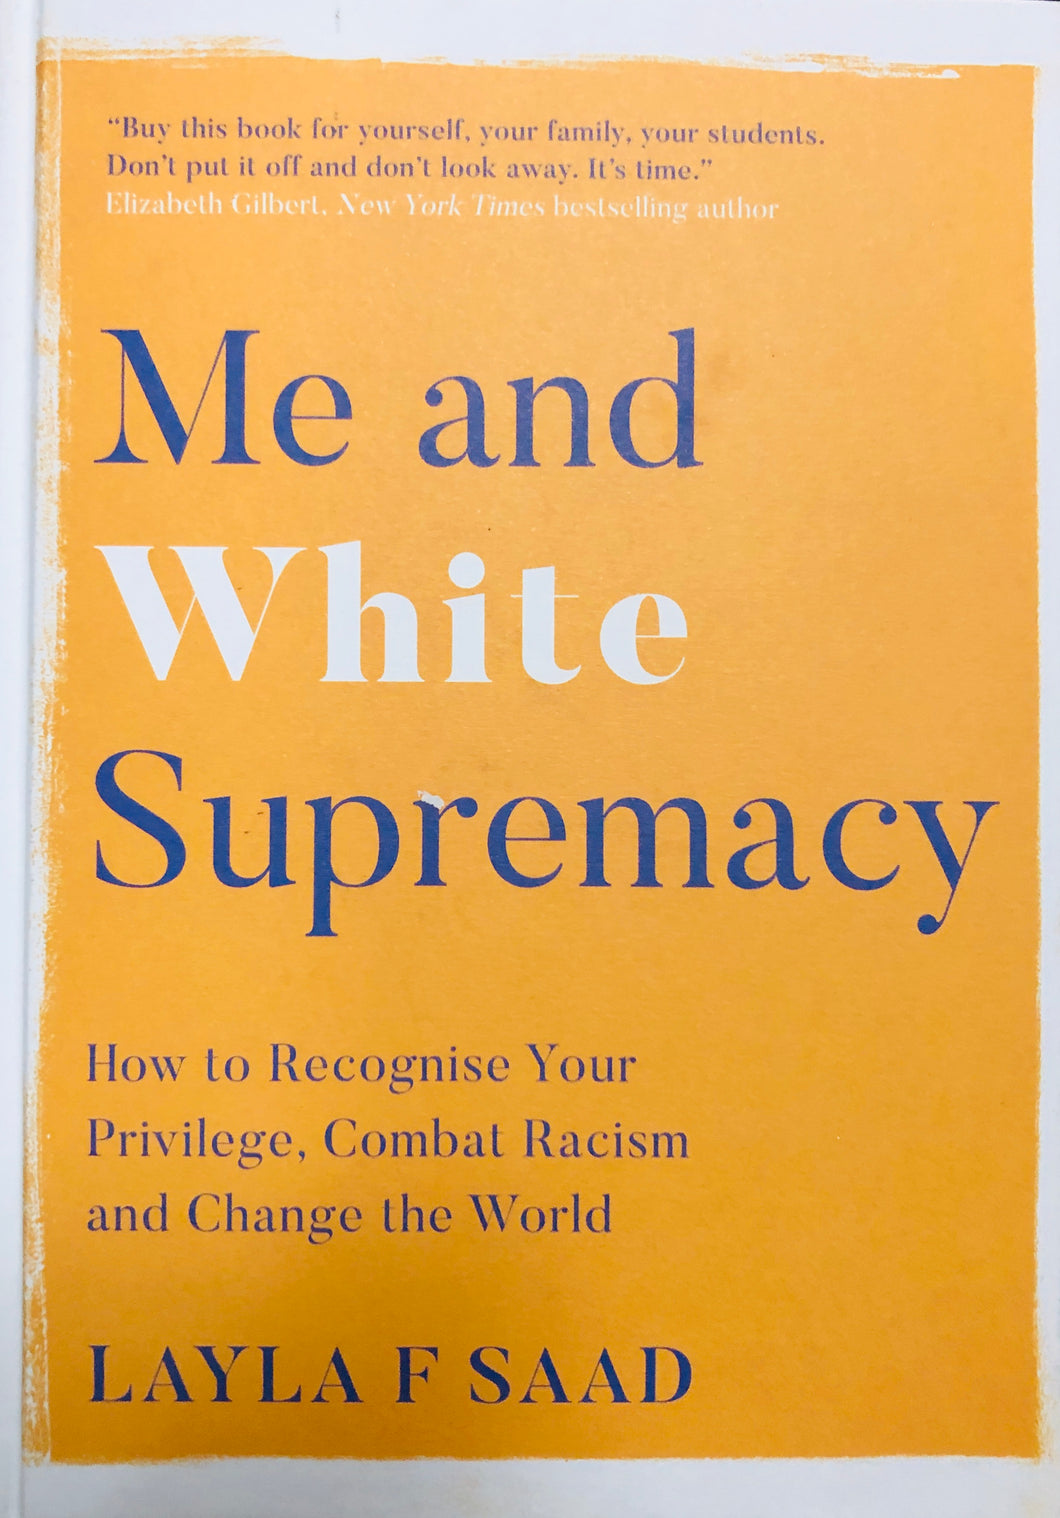 Me and White Supremacy: How to Recognize Your Privilege, Combat Racism and Change the World - Layla Saad